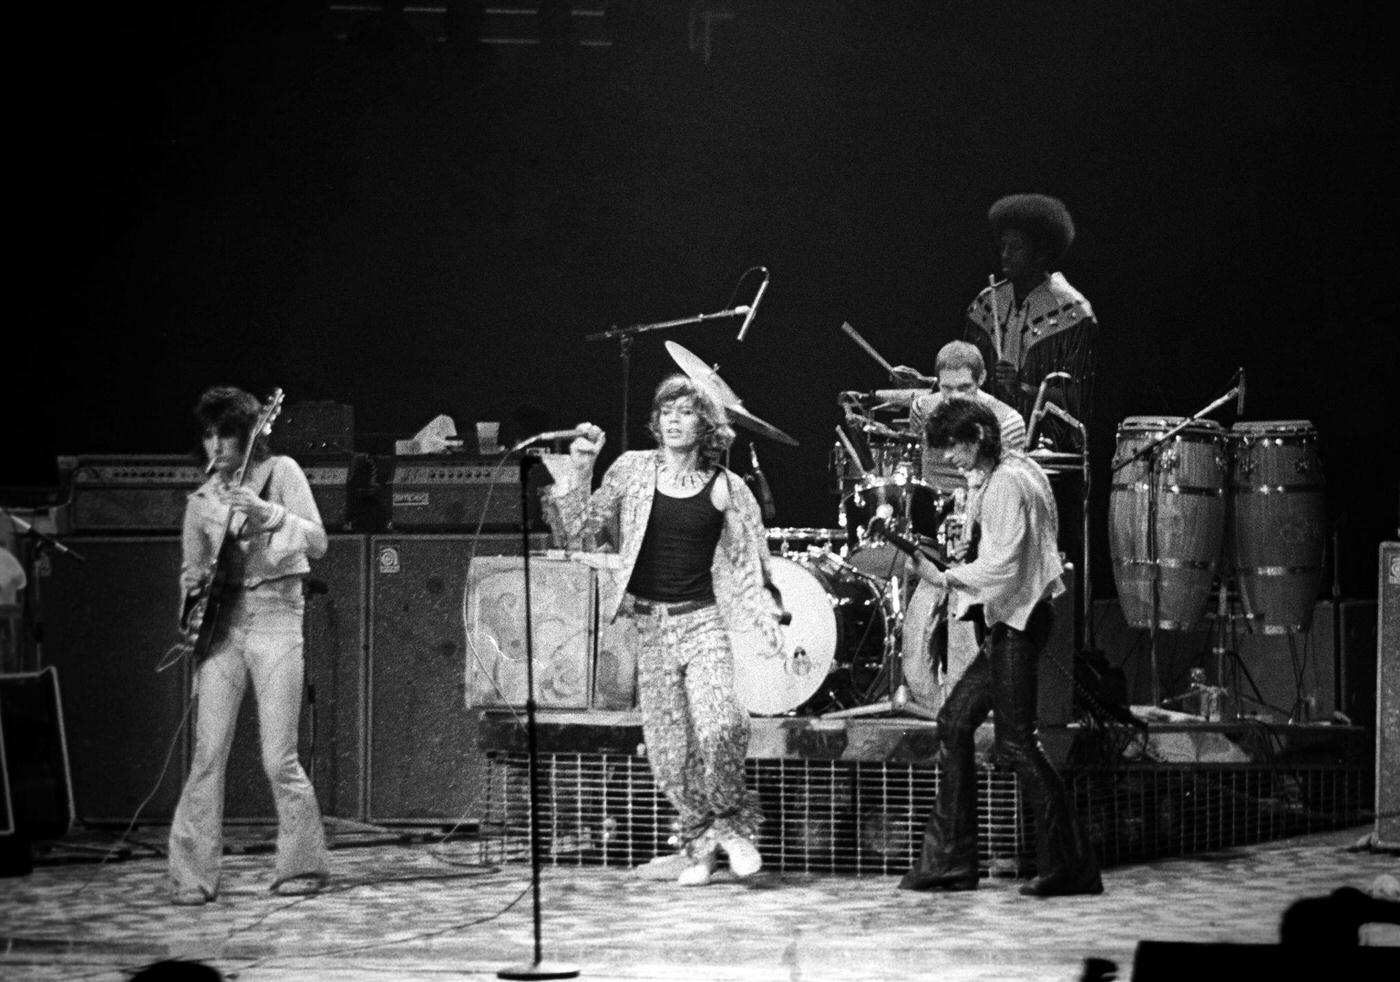 Ronnie Wood, Mick Jagger, Keith Richards, and Charlie Watts perform with percussionist Ollie Brown at Madison Square Garden during the band's 'Tour of America '75" on June 25, 1975, in New York, New York.